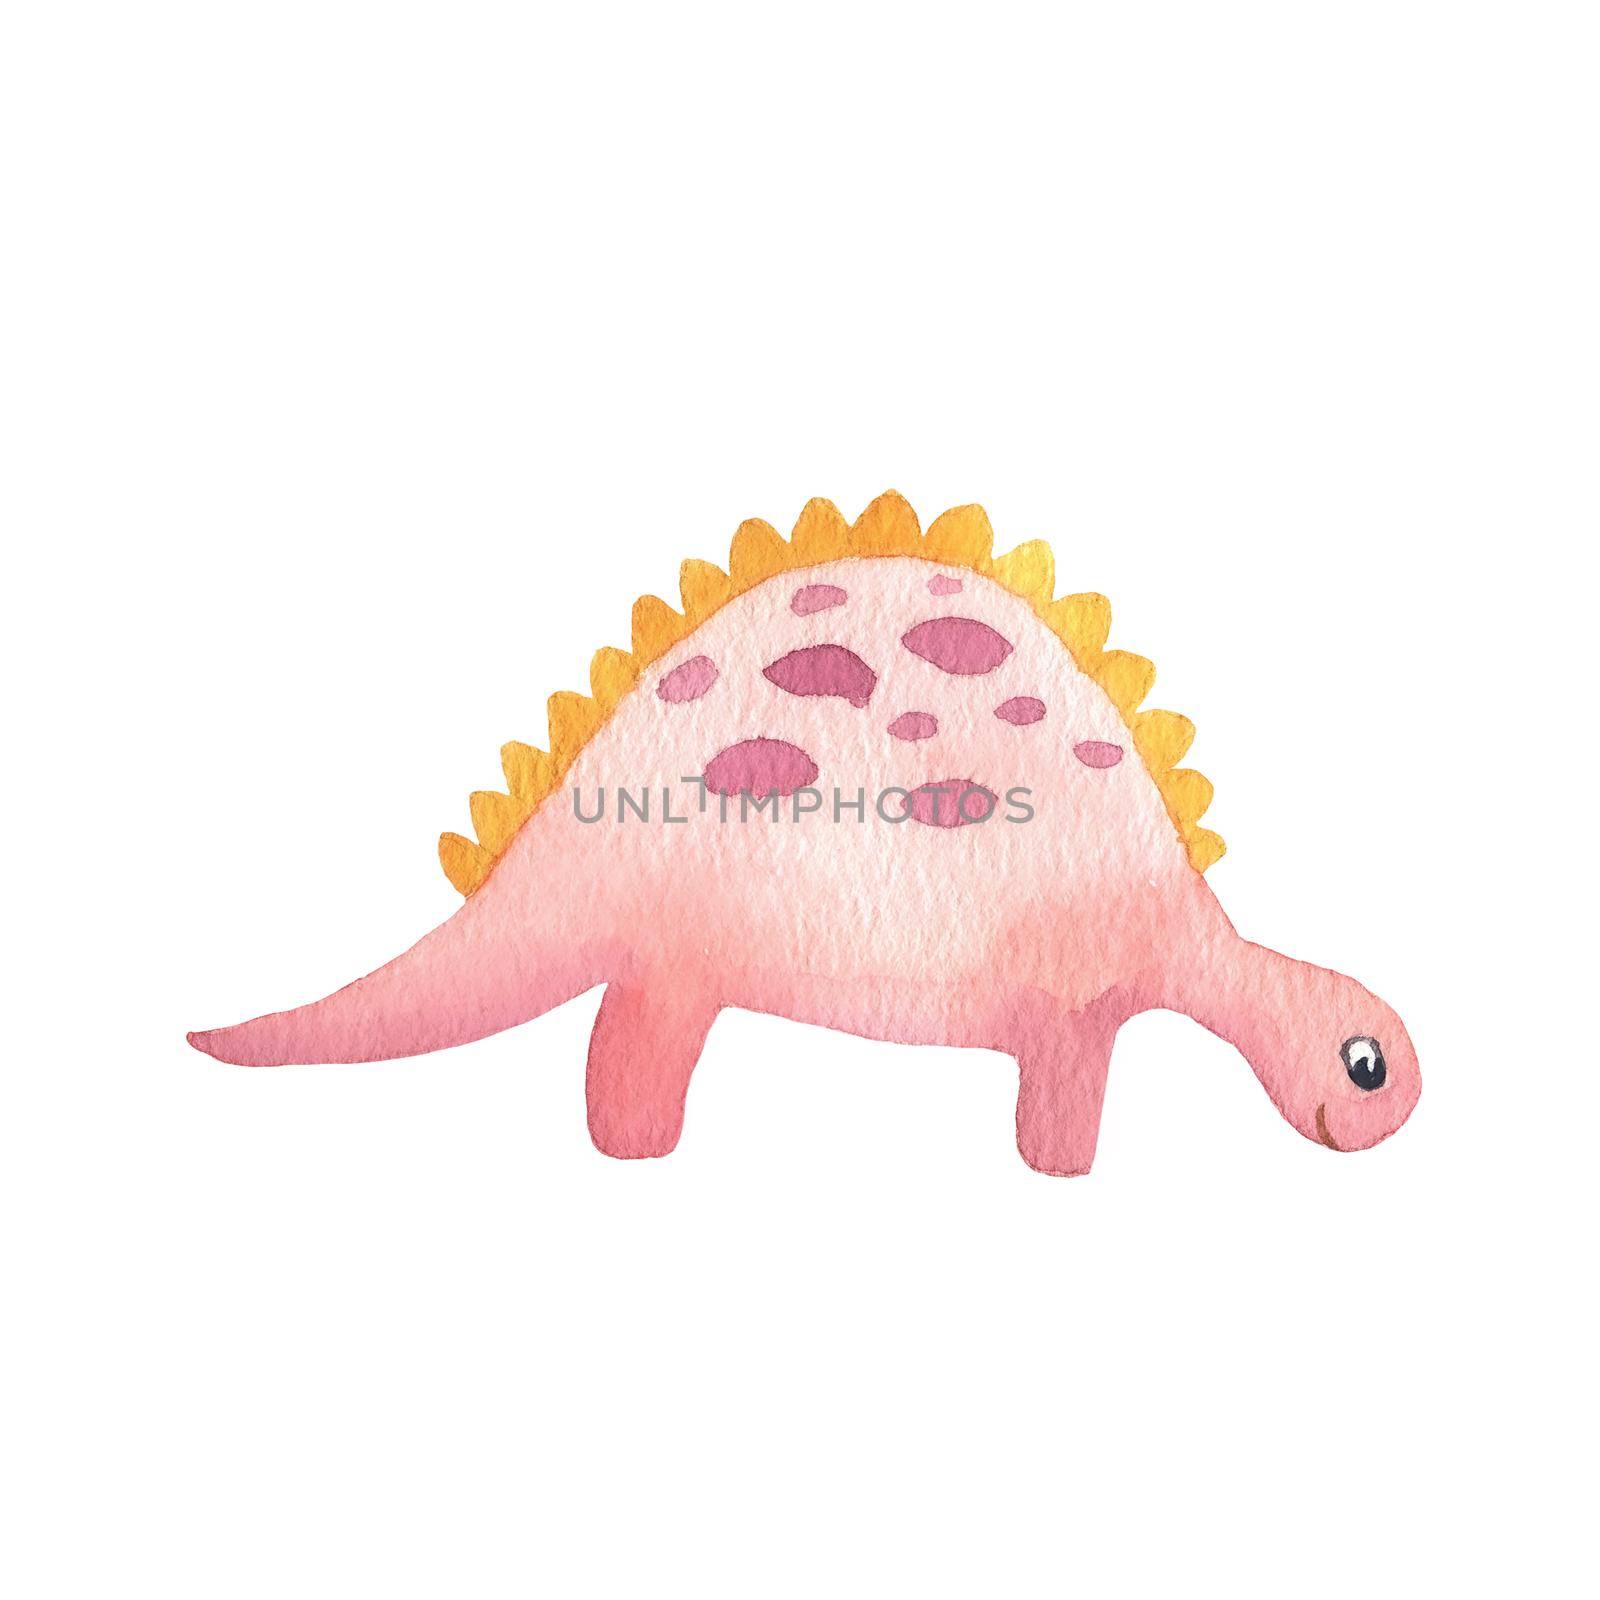 Cute little baby dinosaur. Watercolor drawing illustration isolated on white background.